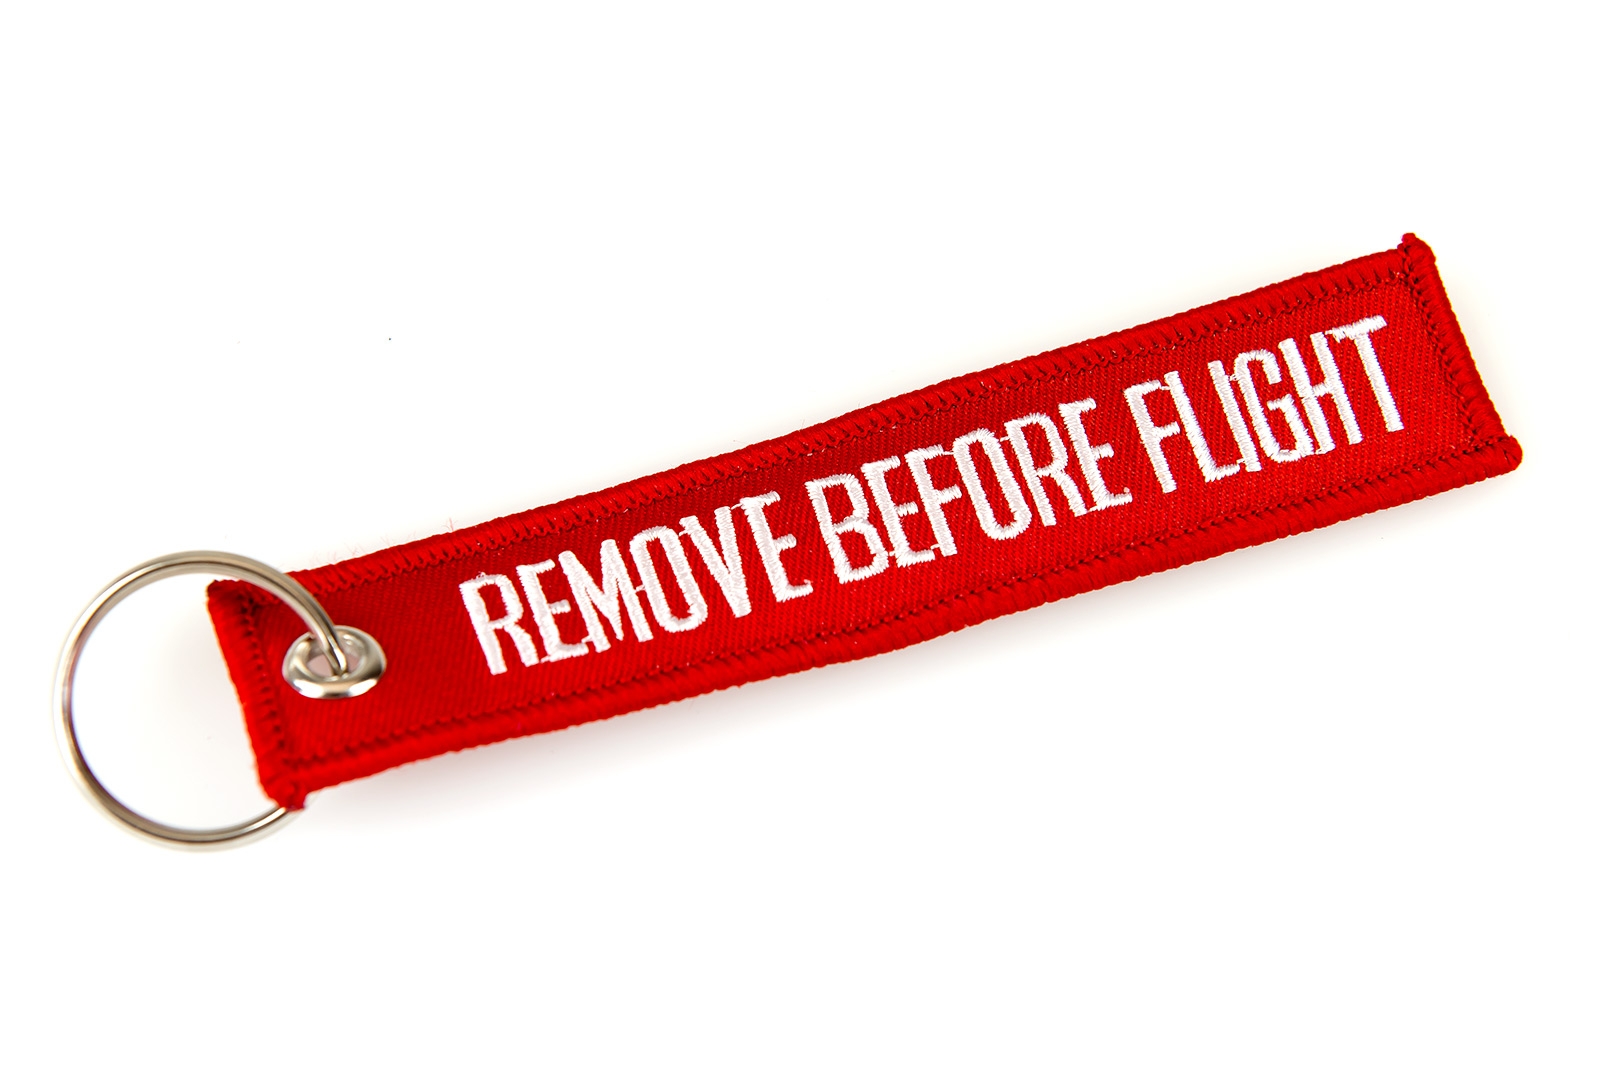 What are those “Remove Before Flight” tags?